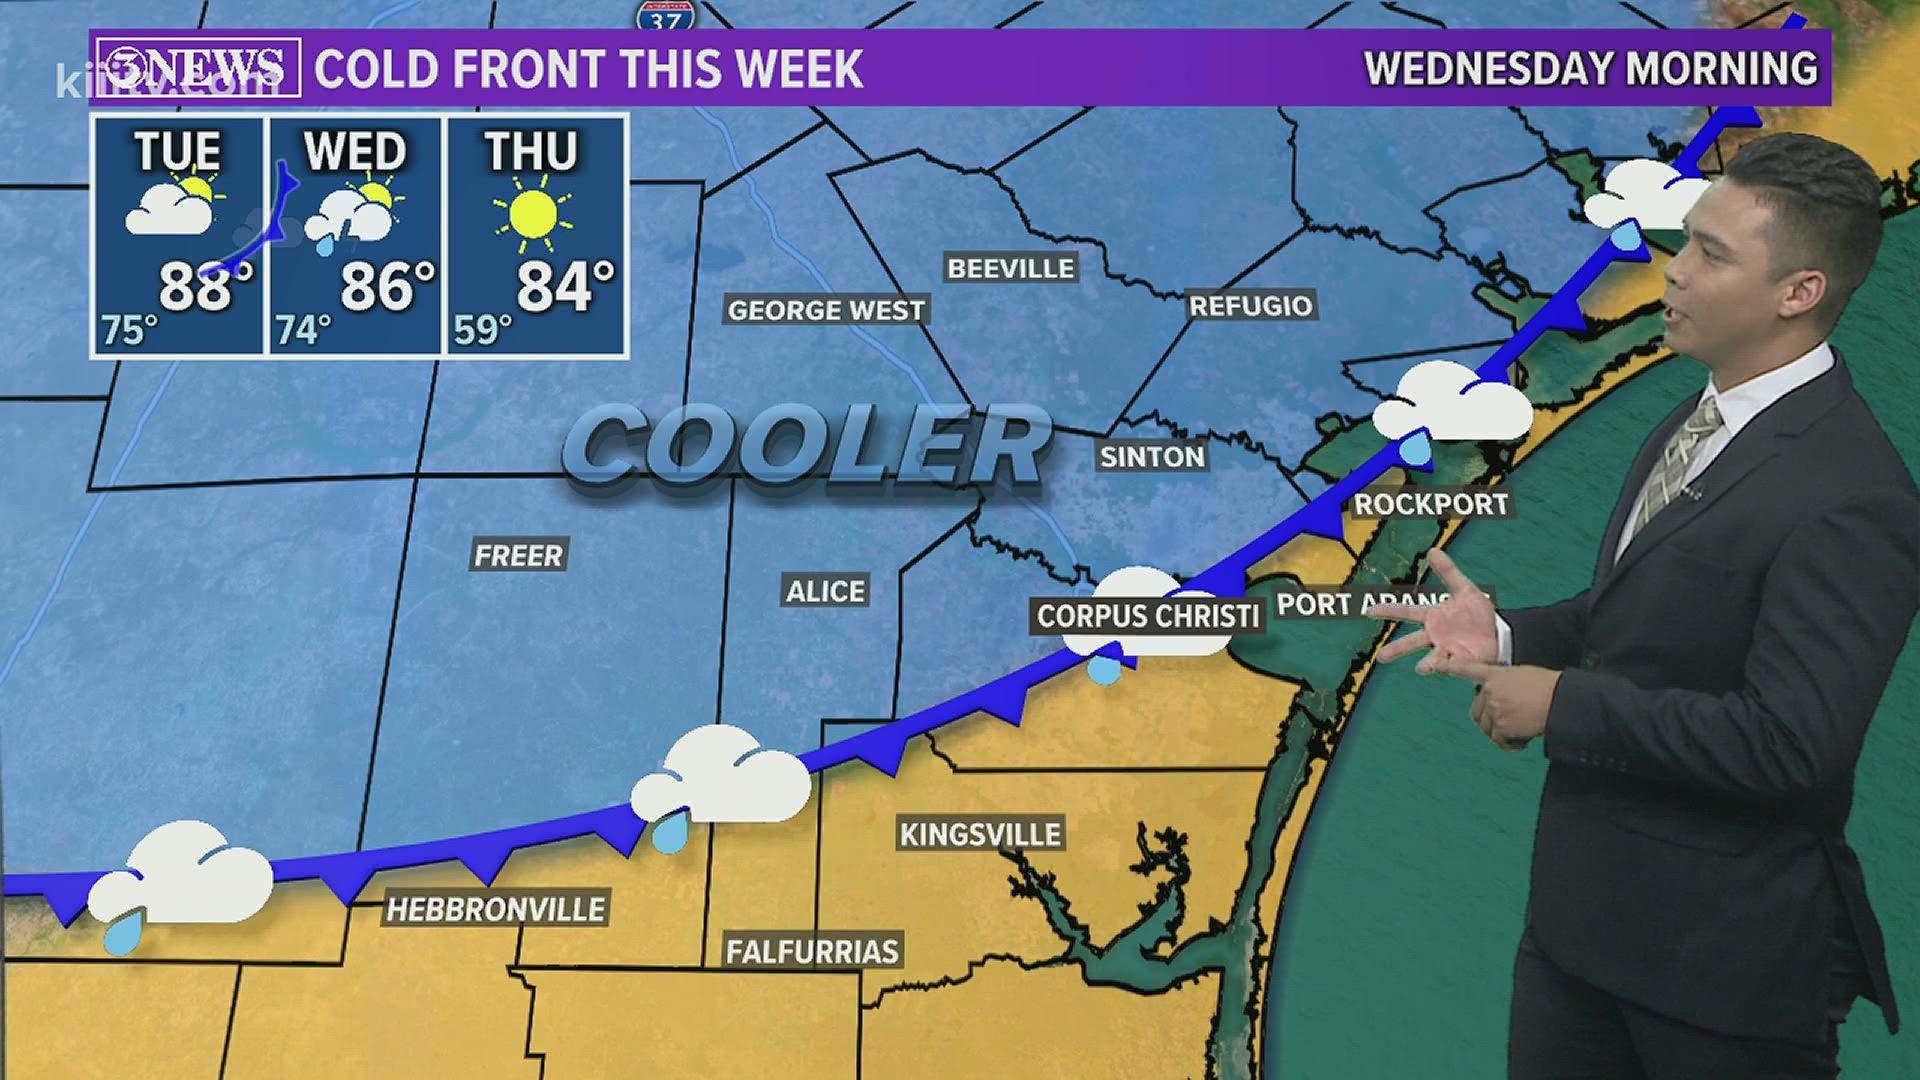 Cold front Wednesday will produce scattered showers and storms before clearing out mid-week.